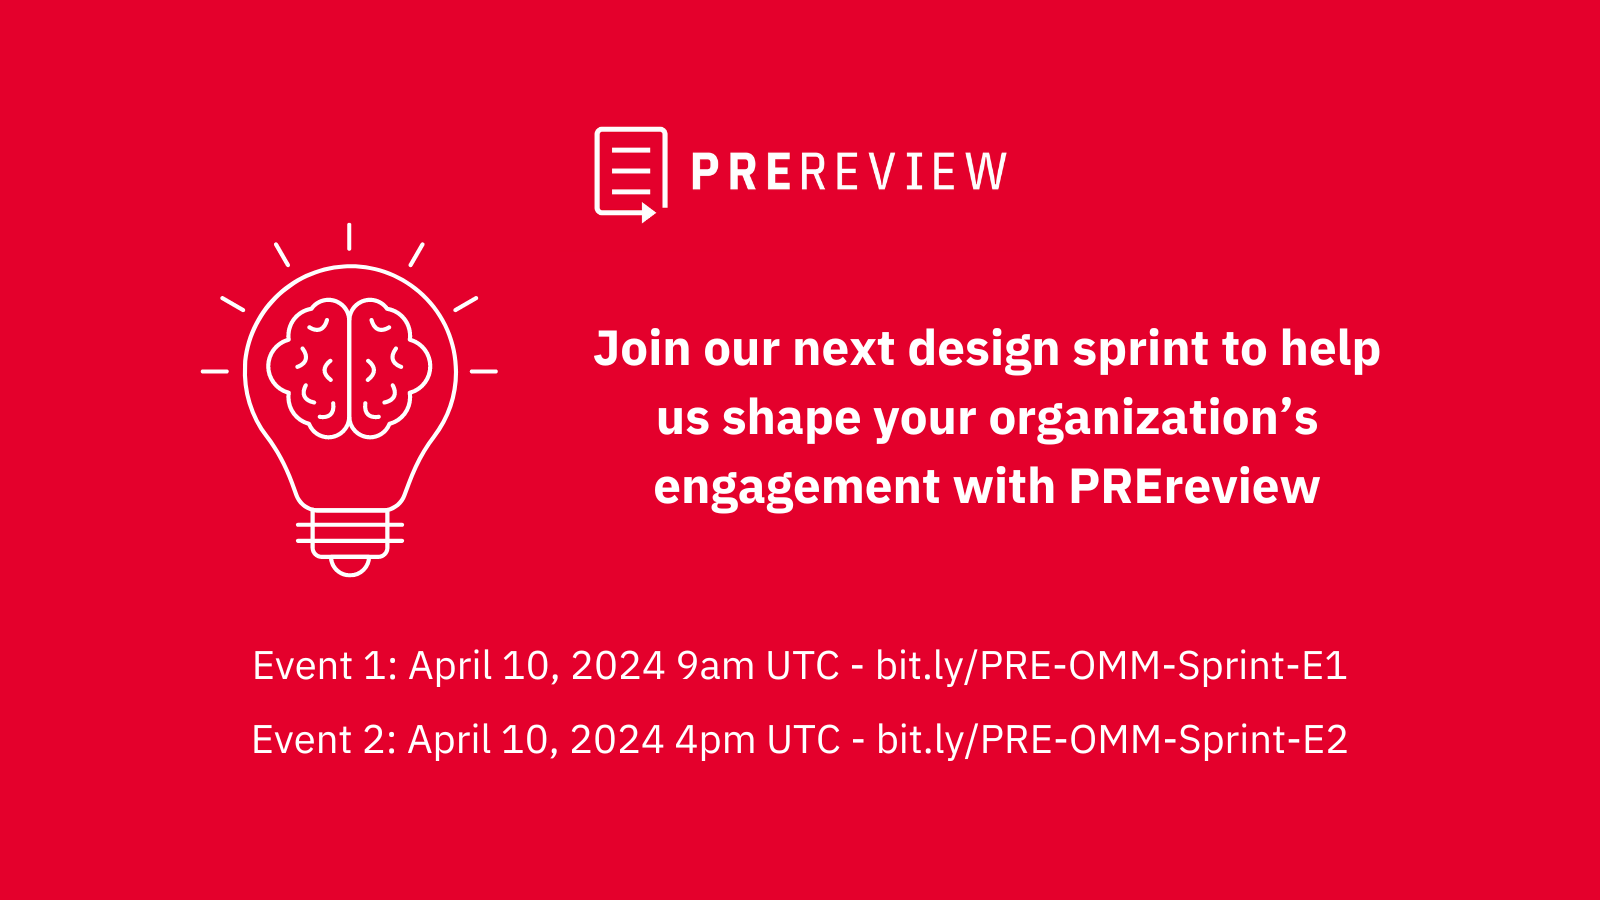 Red rectangle with white PREreview logo, white icon of a glowing light-bulb with a brain inside, and white text saying: Join our next design sprint to help us shape your organization's engagement with PREreview. Event 1: April 10, 2024 9am UTC - bit.ly/PRE-OMM-Sprint-E1; Event 2: April 10, 2024 4pm UTC - bit.ly/PRE-OMM-Sprint-E2